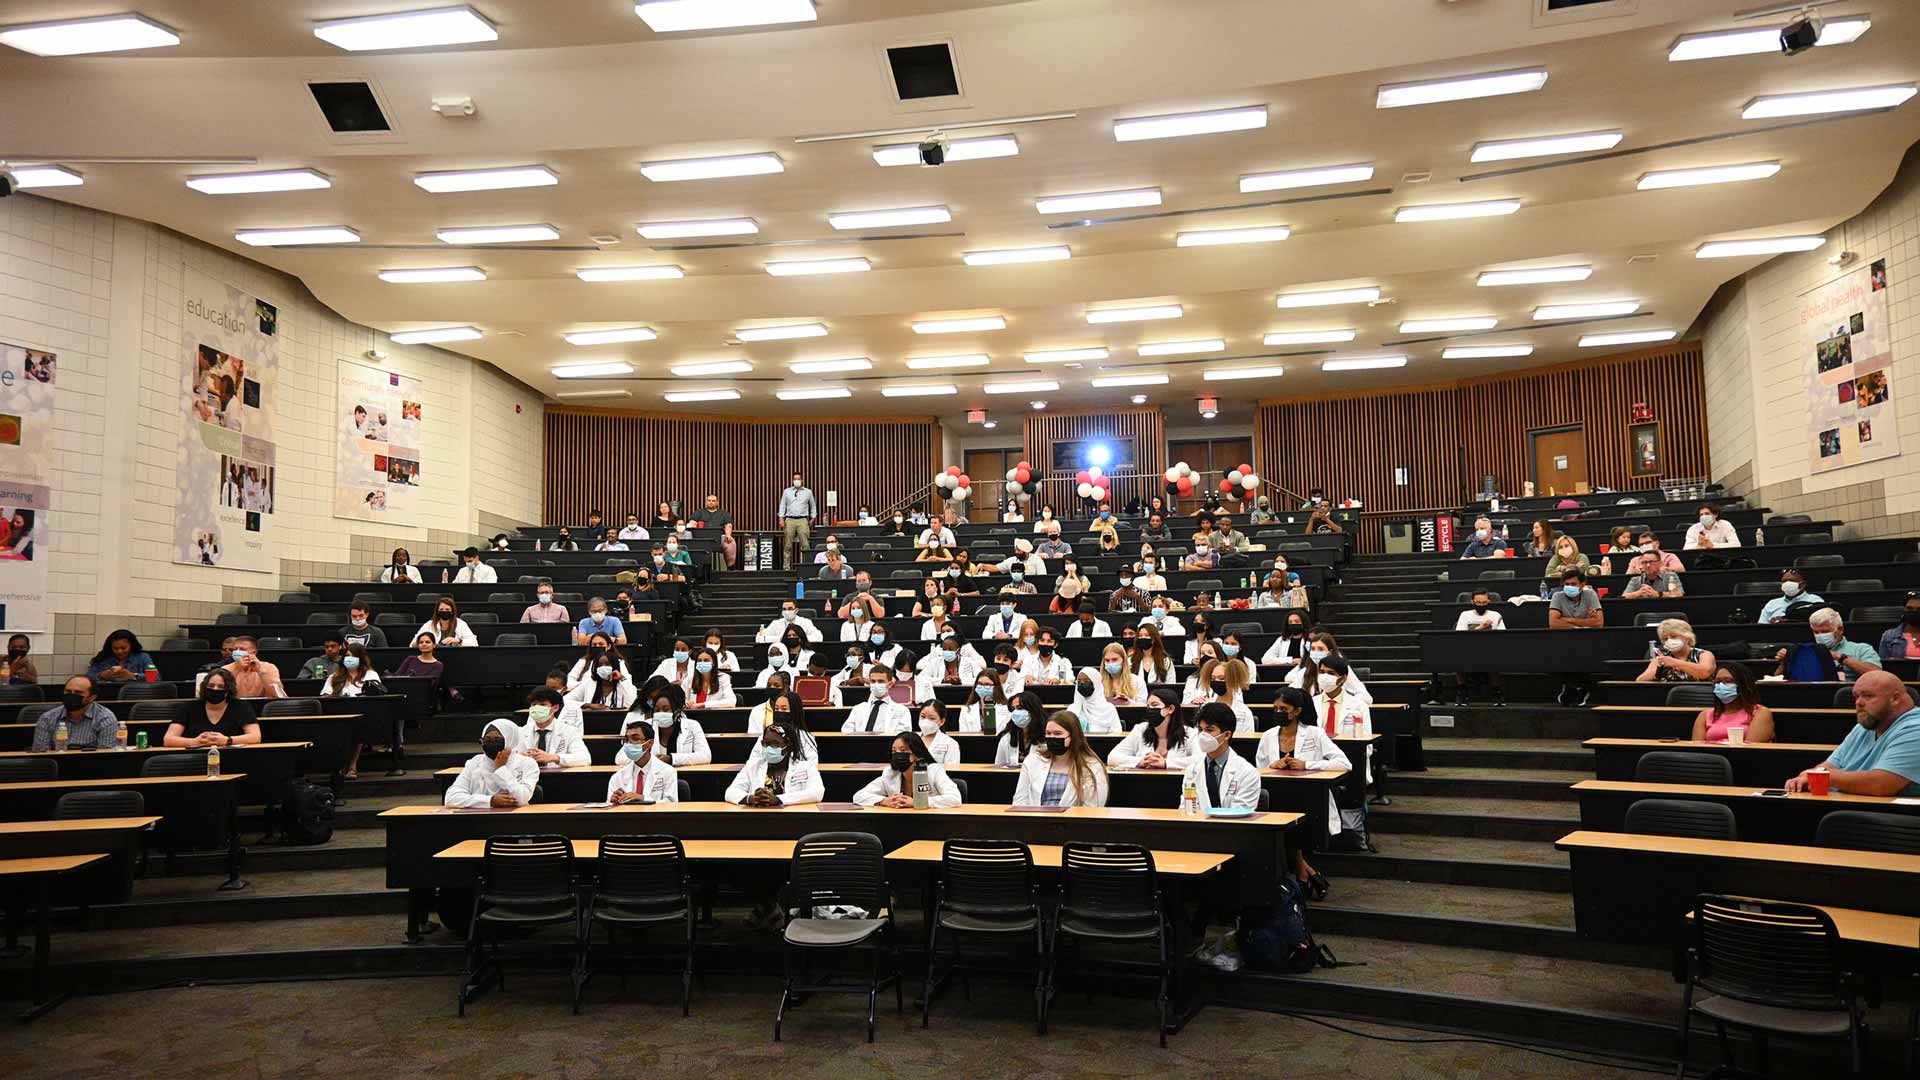 MD Camp participants in the lecture hall